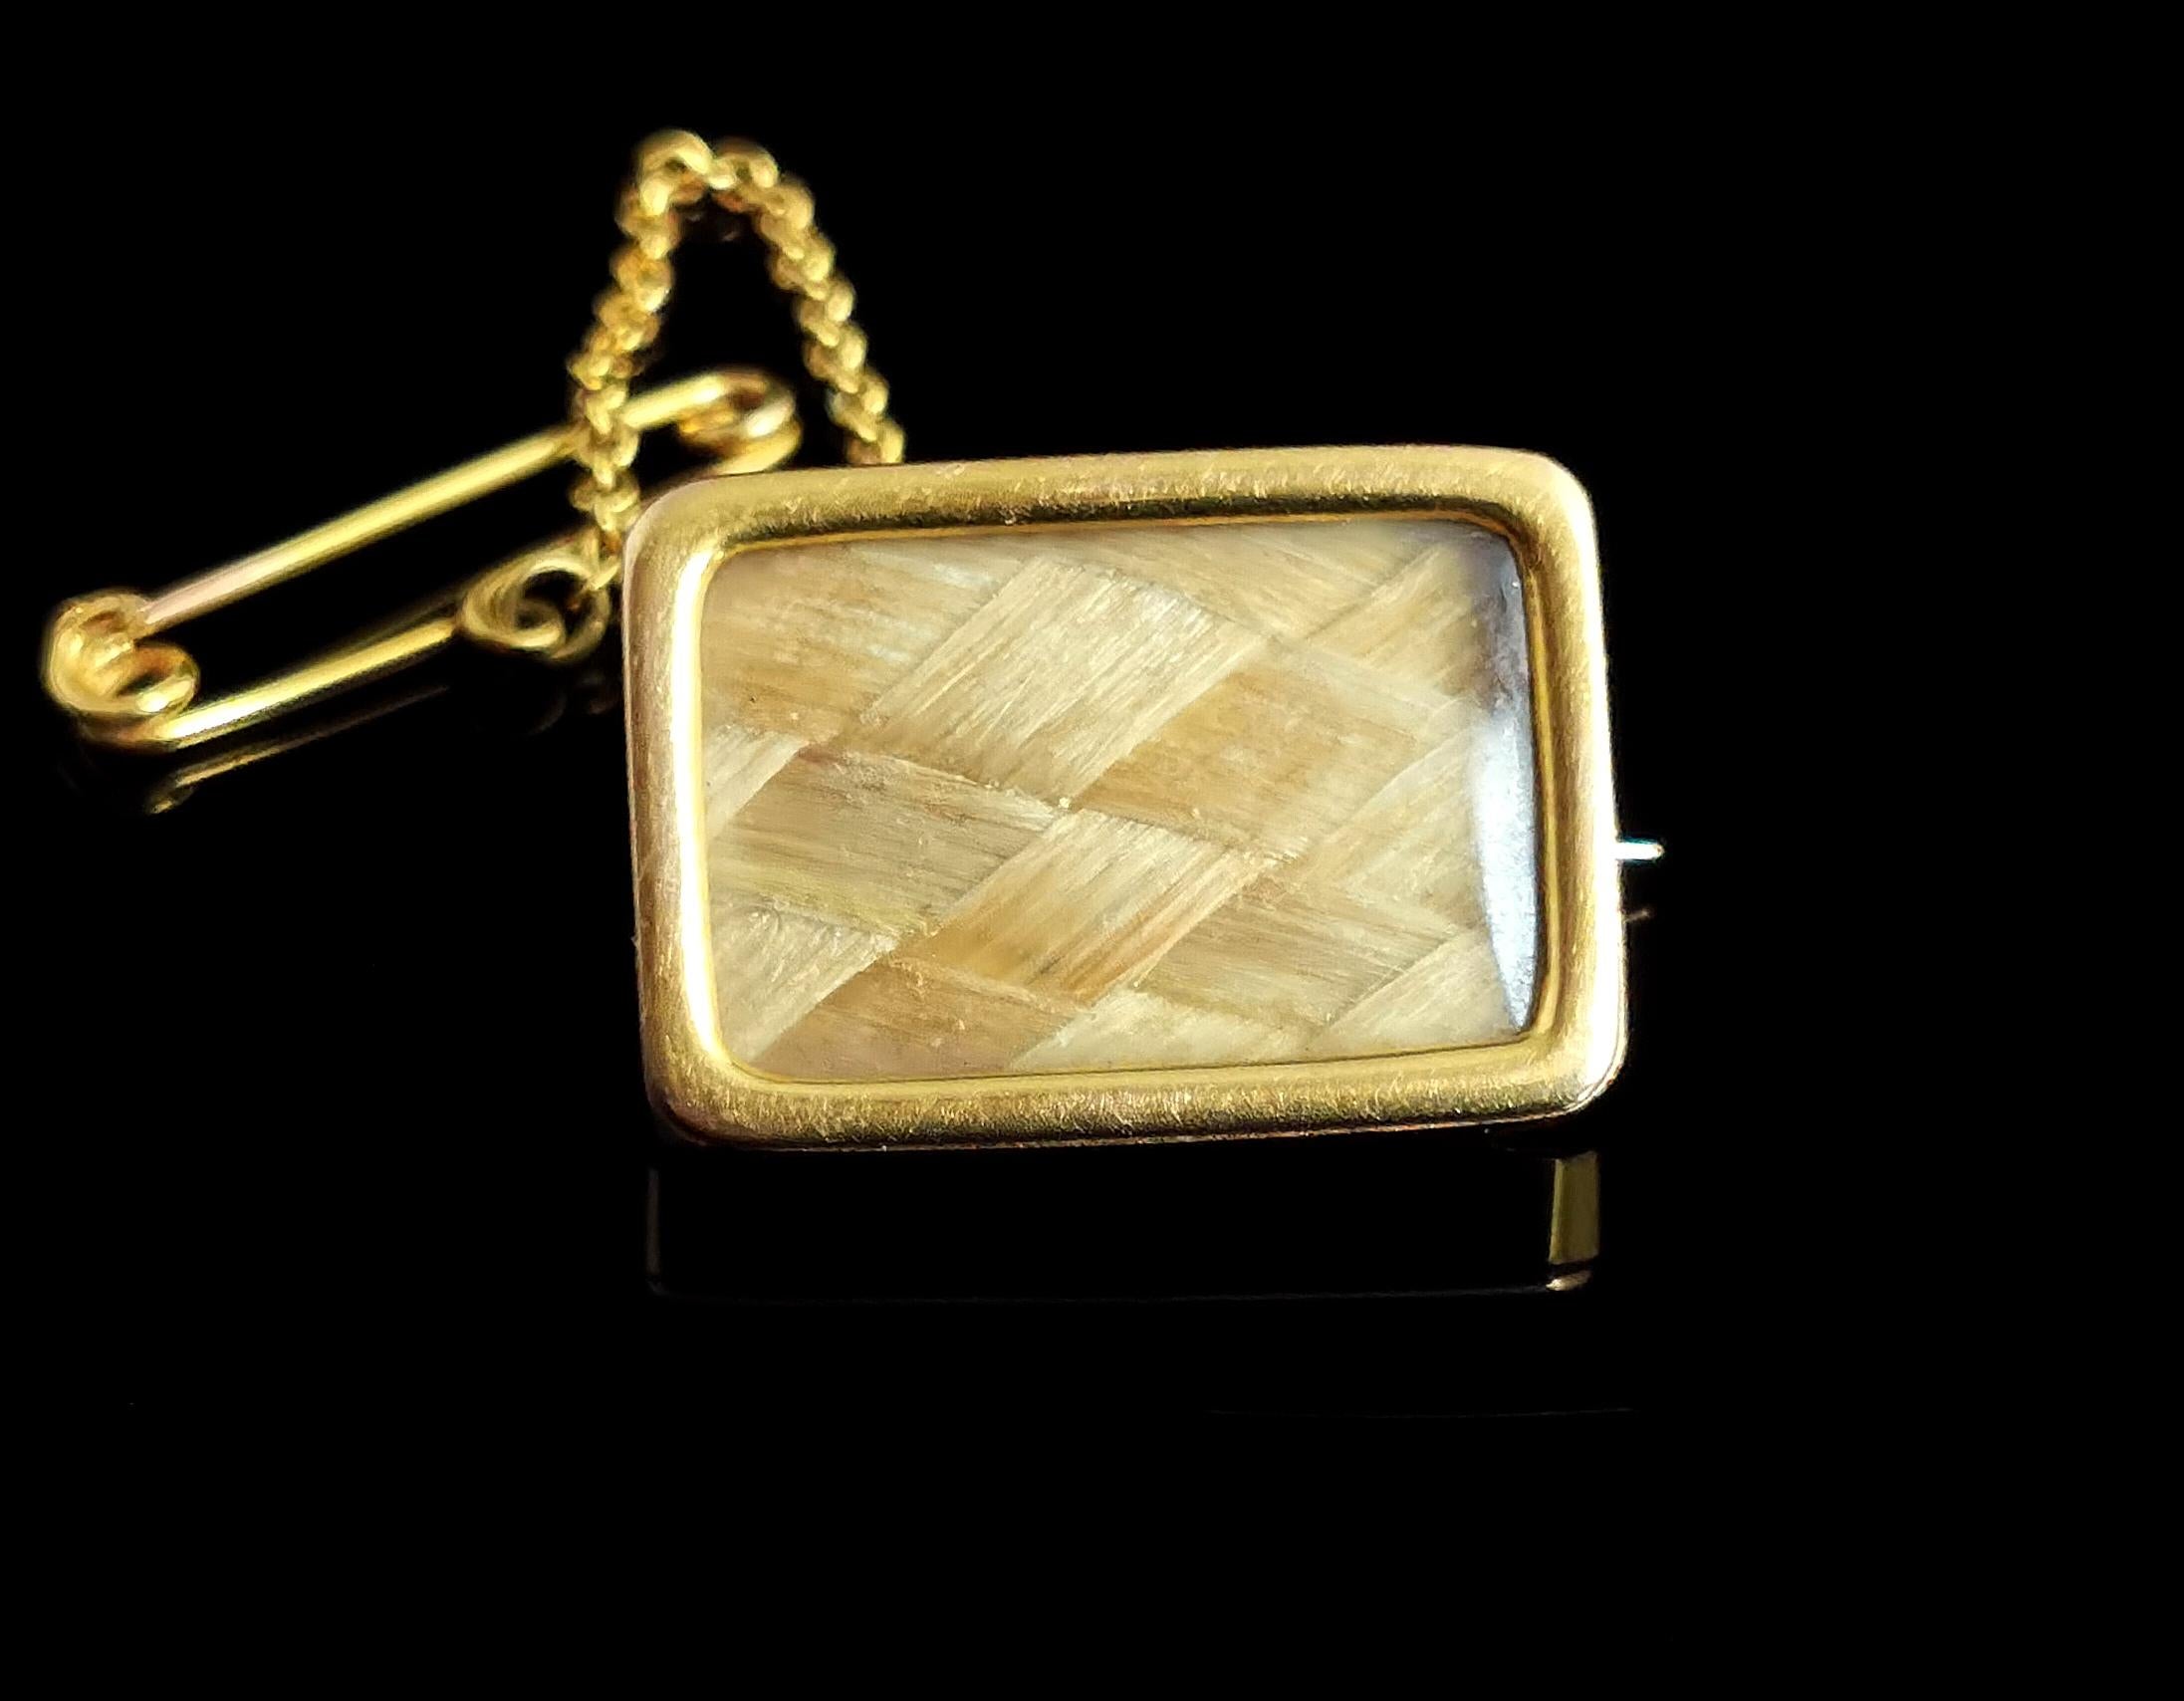 A sweet and unusual antique Victorian 9kt gold mourning brooch or pin.

A small sized brooch with a rectangular 9kt yellow gold frame and back, the front with a glazed panel, enclosing a finely plaited lock of golden blonde hair.

It has simple